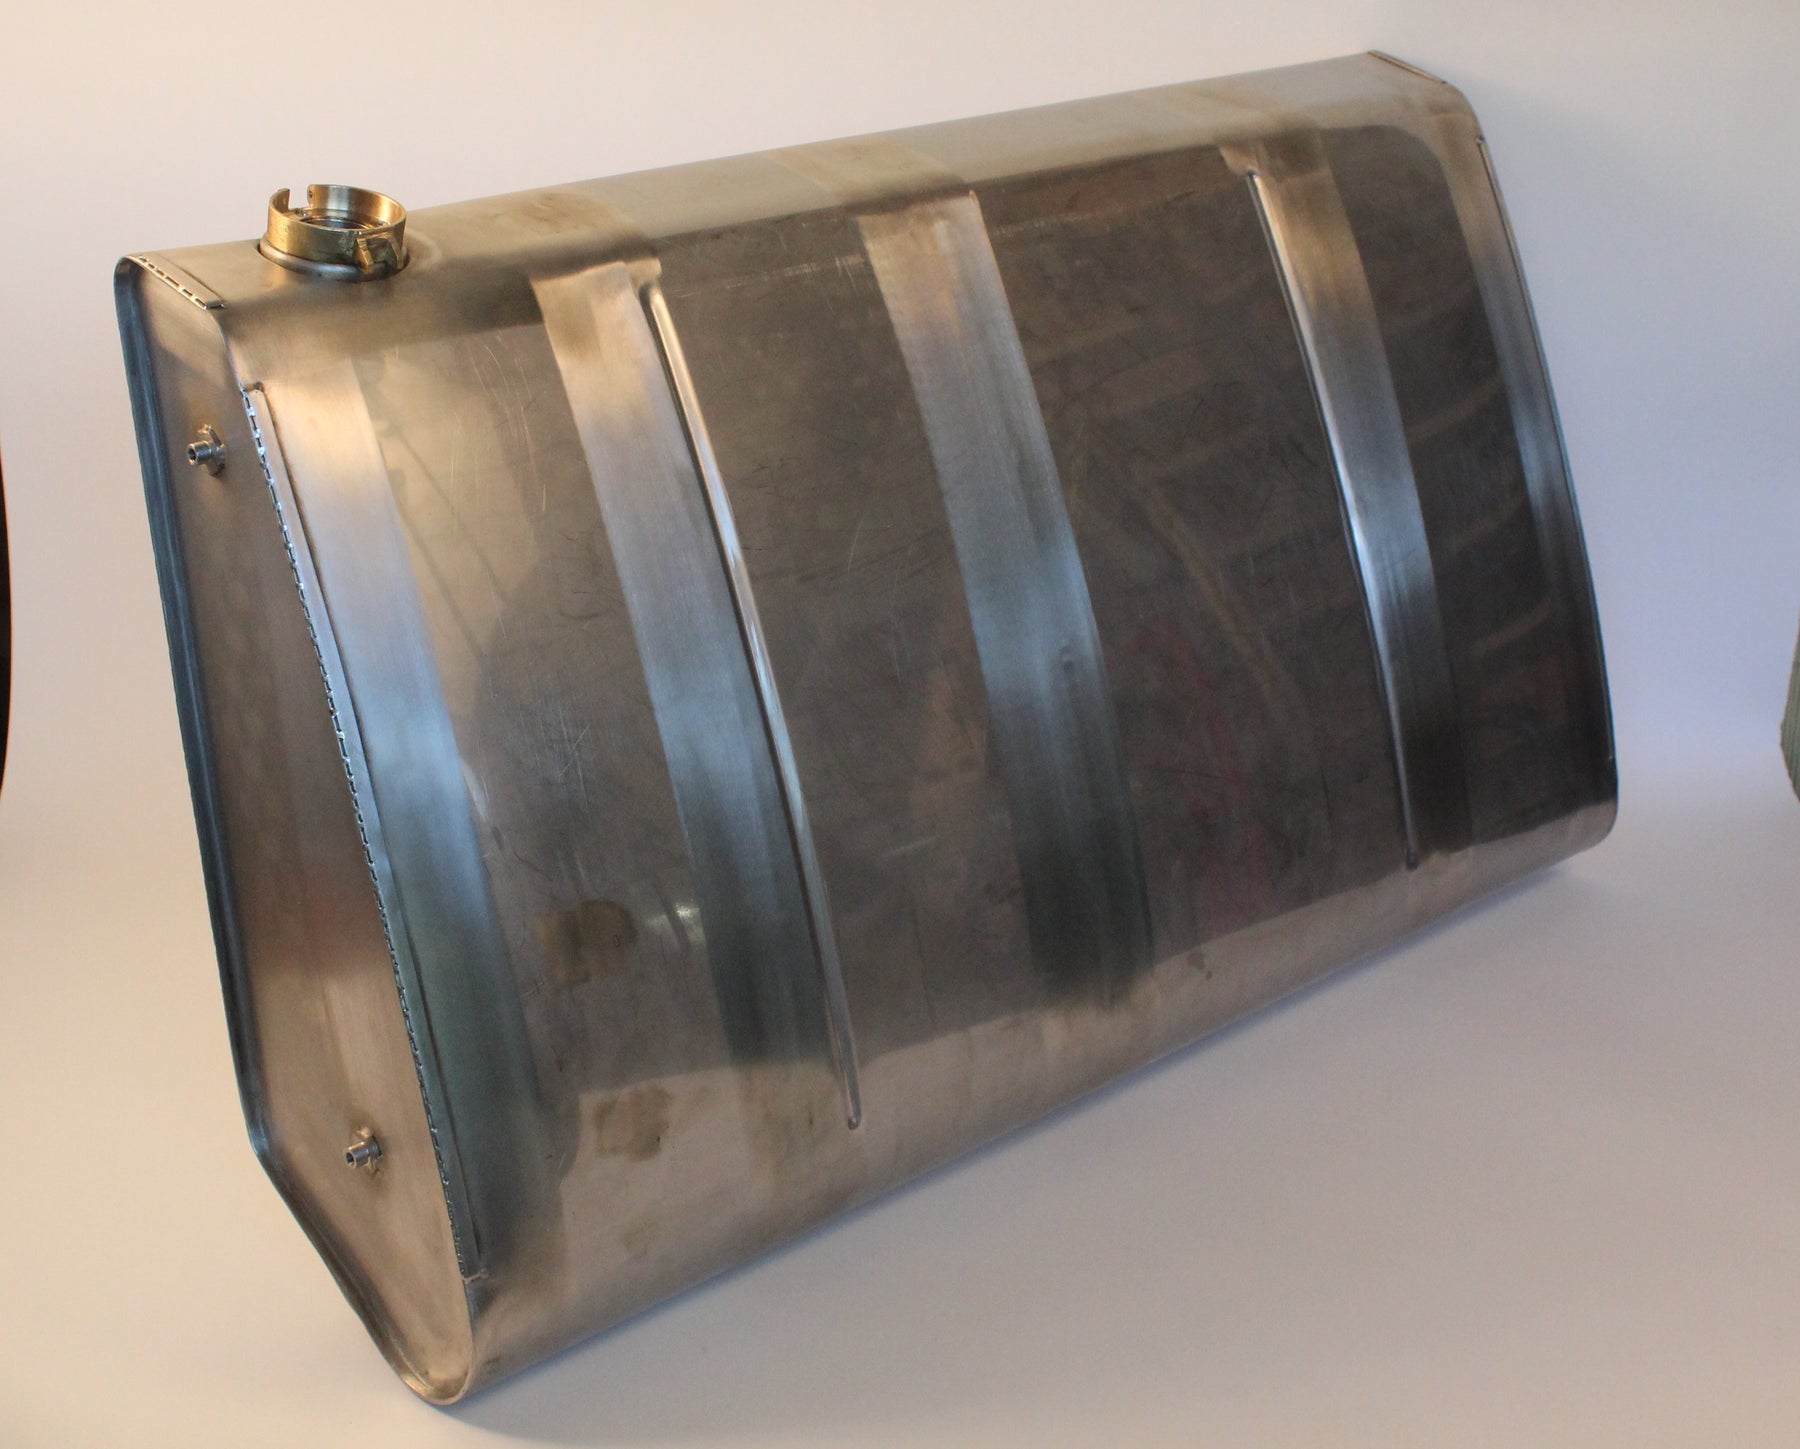 New Product – Stainless Steel Fuel Tanks for the MG TD